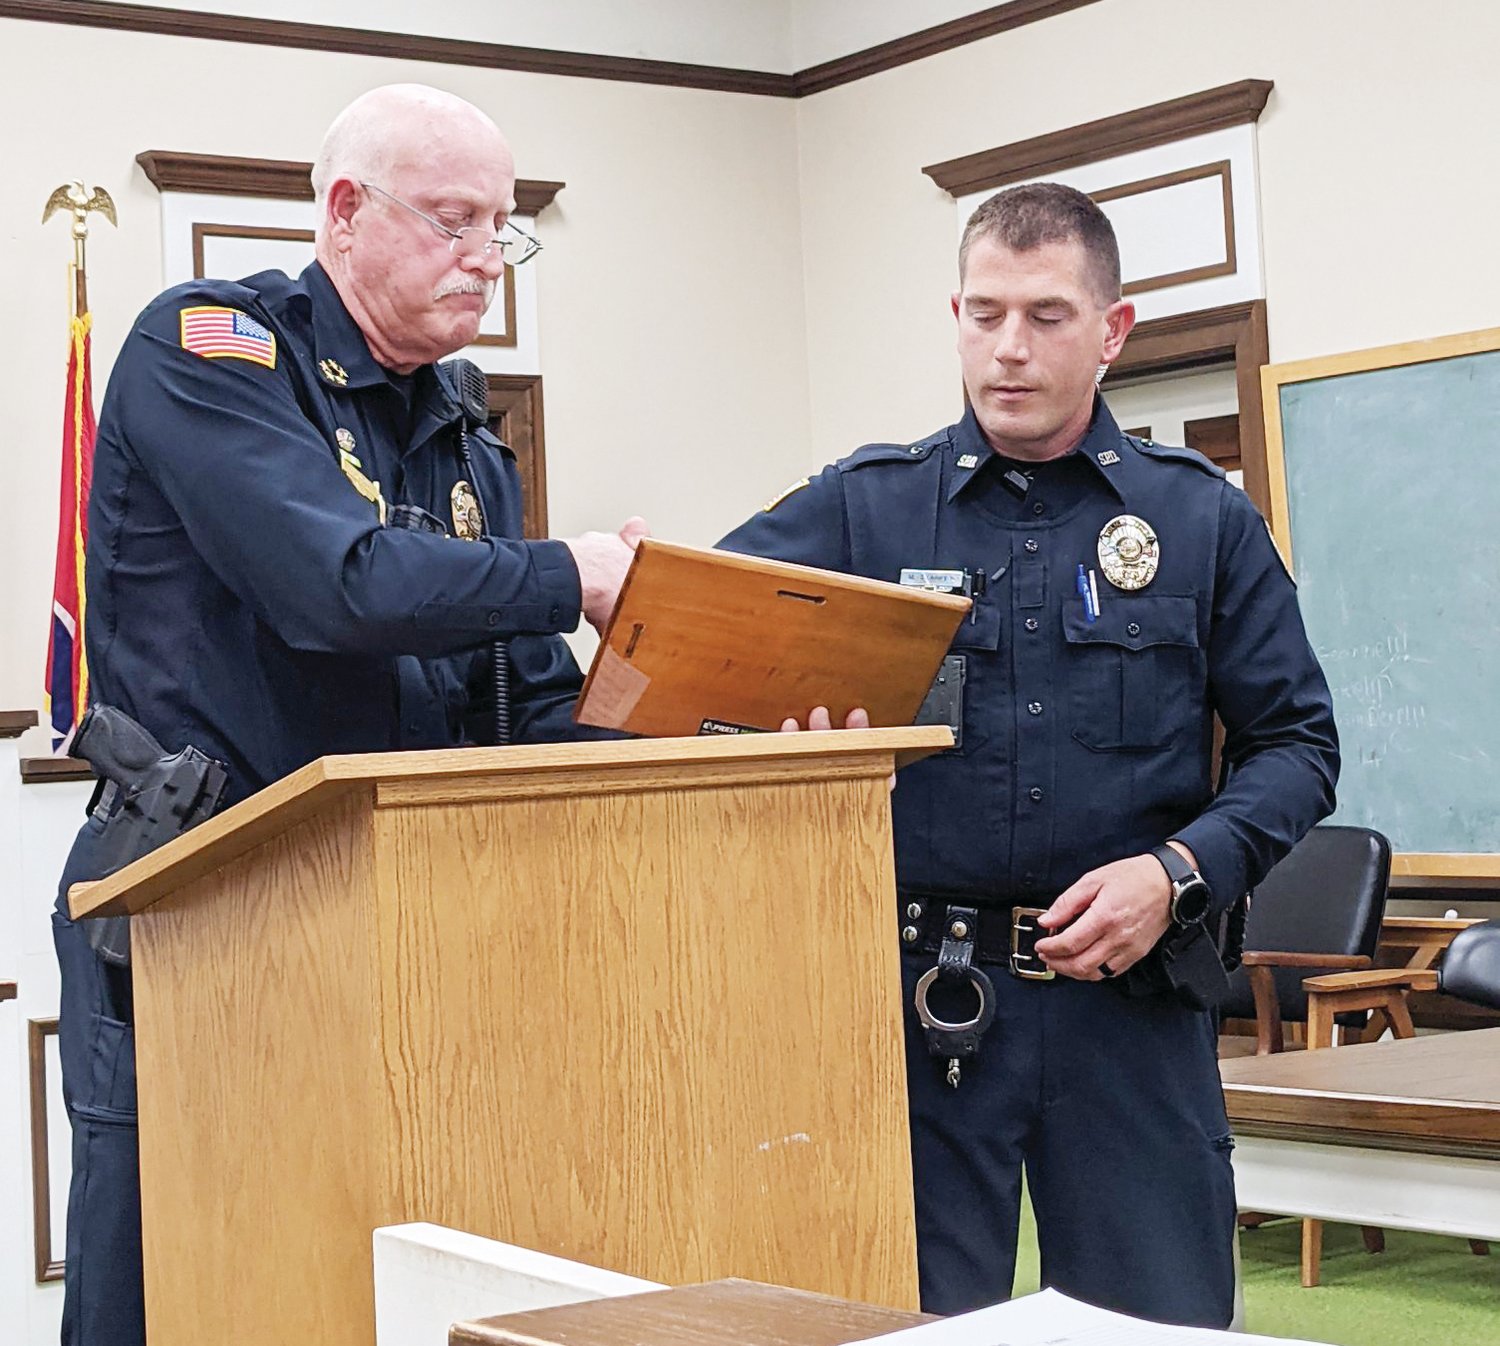 Sparta Police Chief Doug Goff presents the Officer of the Year Award to Brandon Starkey, a member of Sparta Police Department.